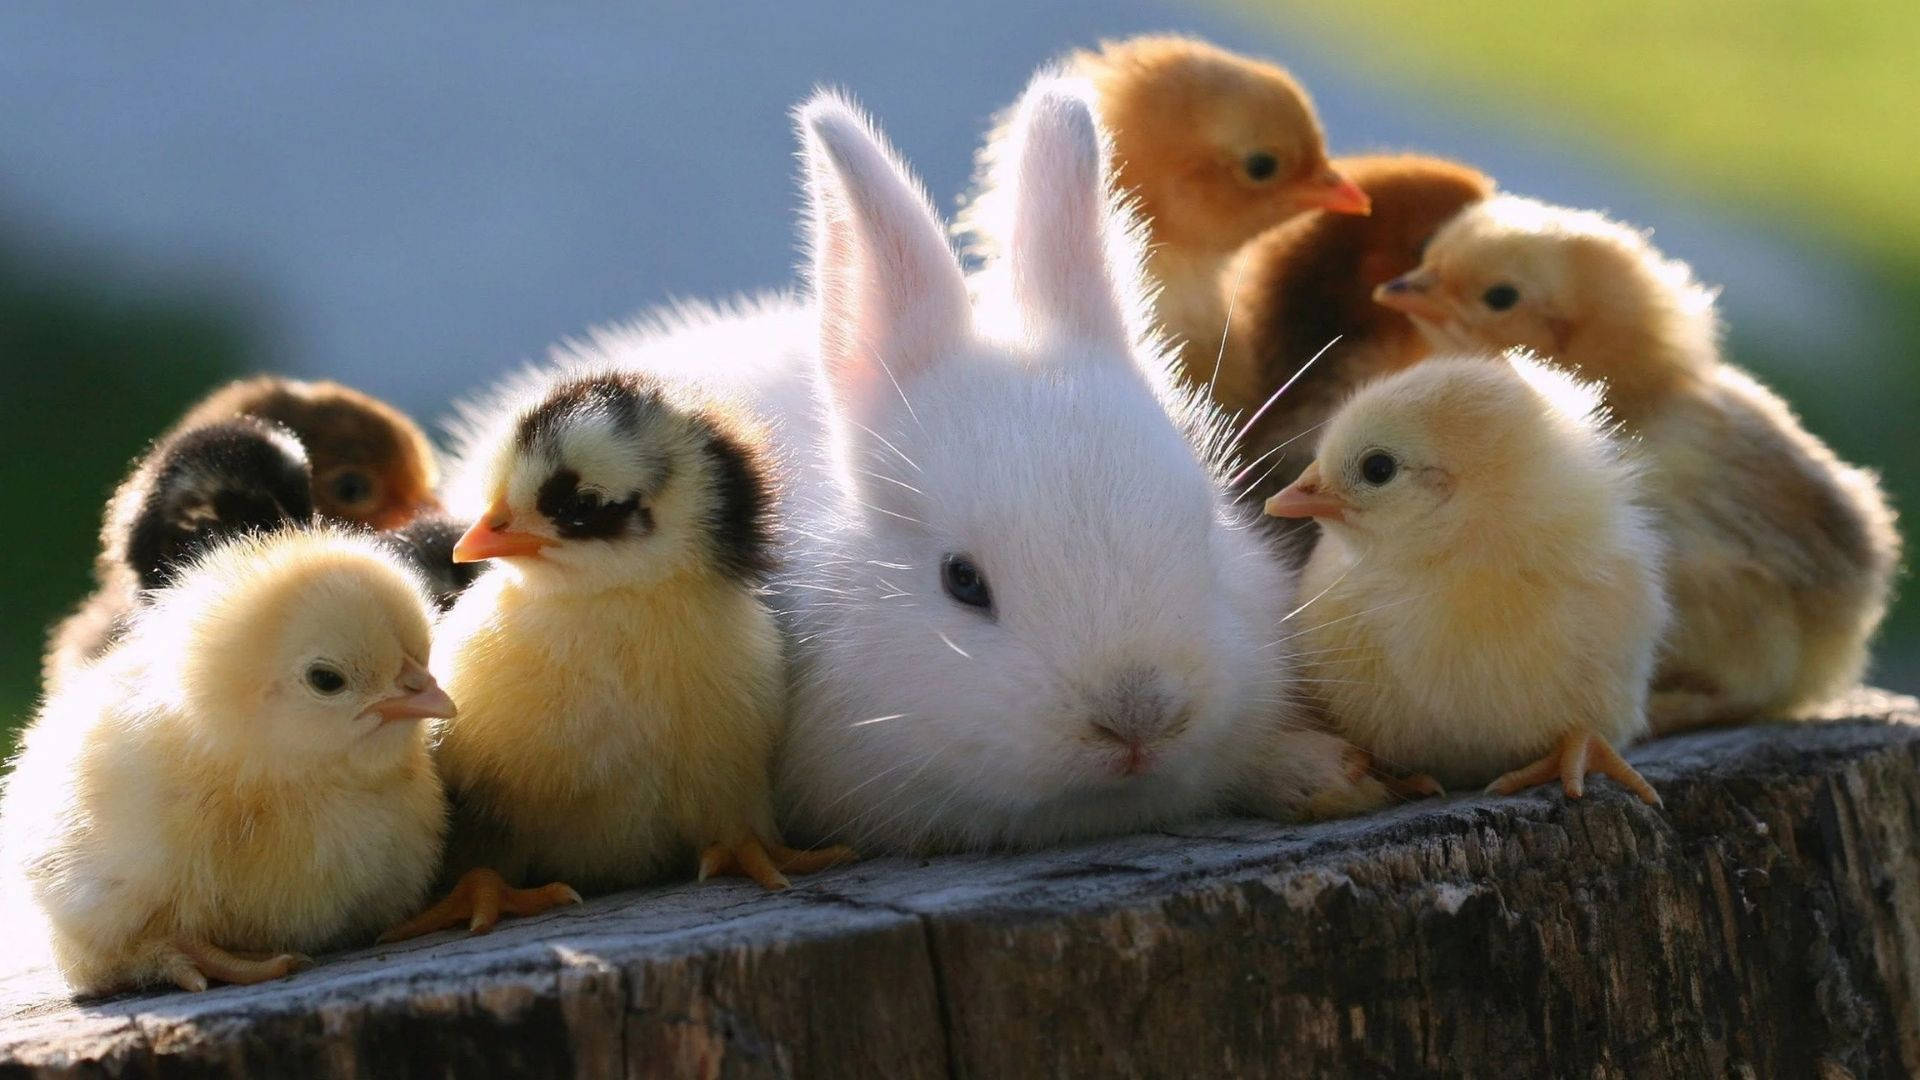 Bunny With Baby Chick Animals